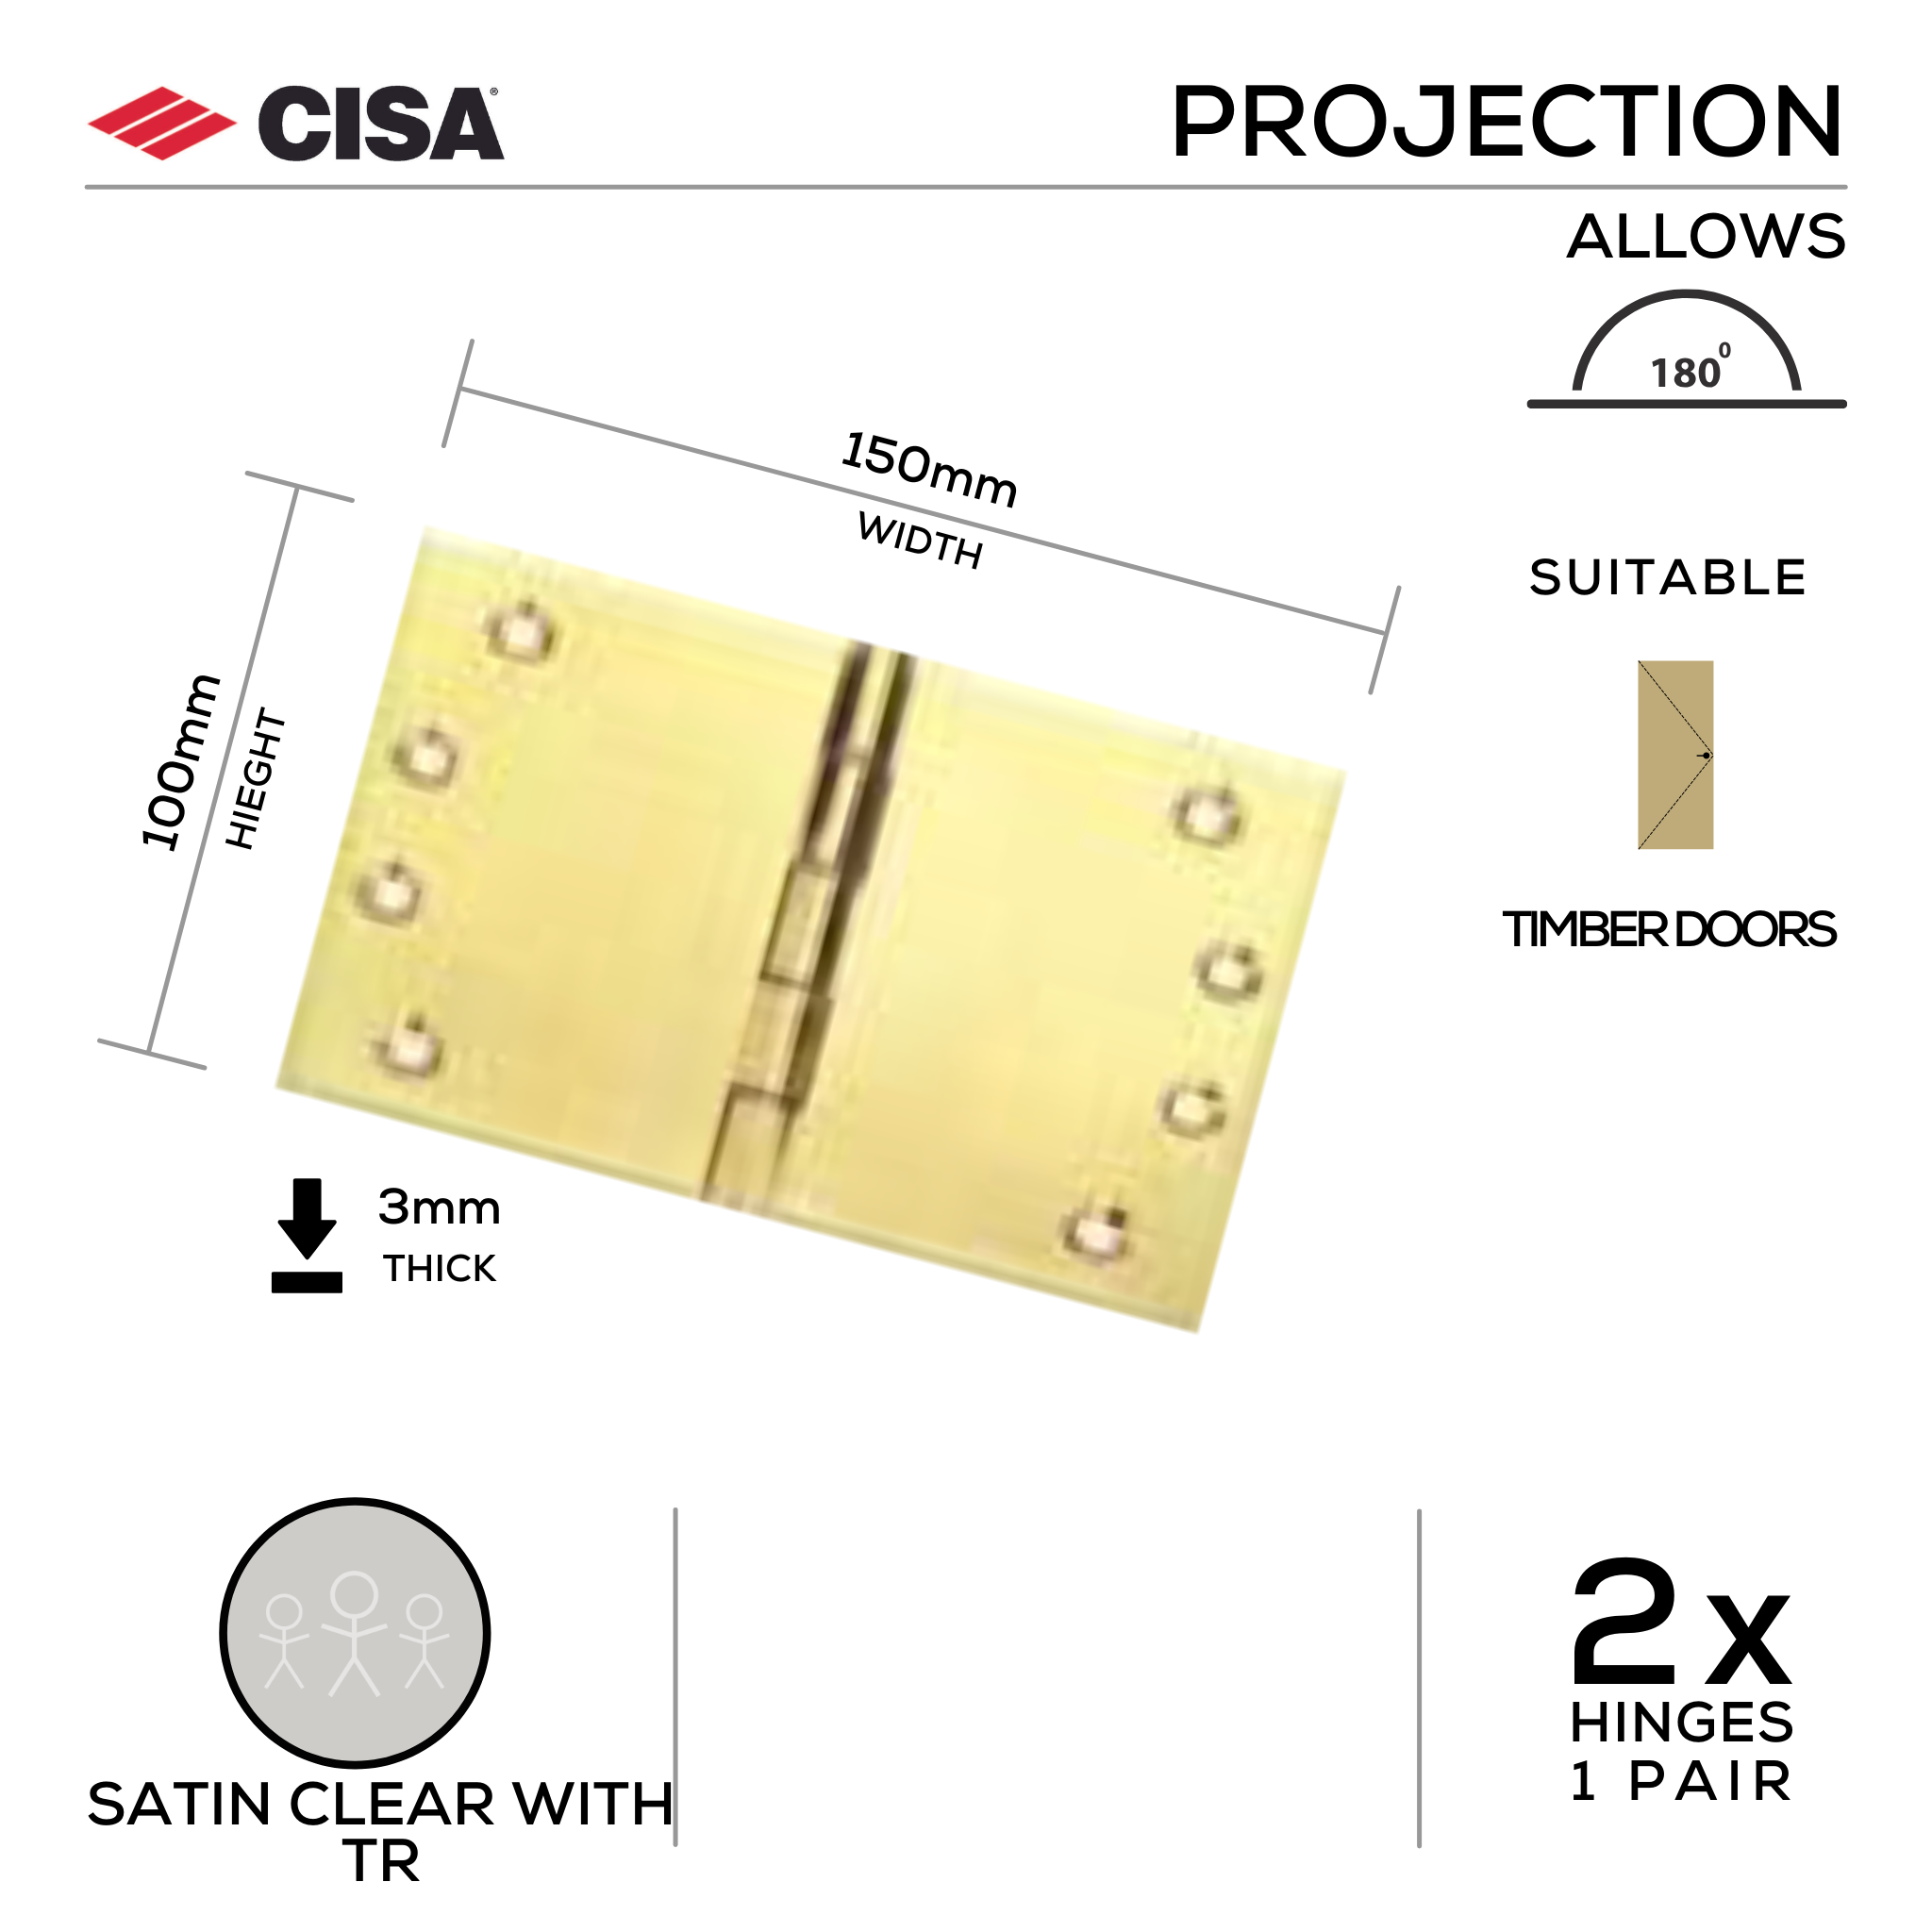 FH150X3-TR, Projection Hinge, 2 x Hinges (1 Pair), 100mm (h) x 150mm (w) x 3mm (t), Satin with Tarnish Resistant, CISA